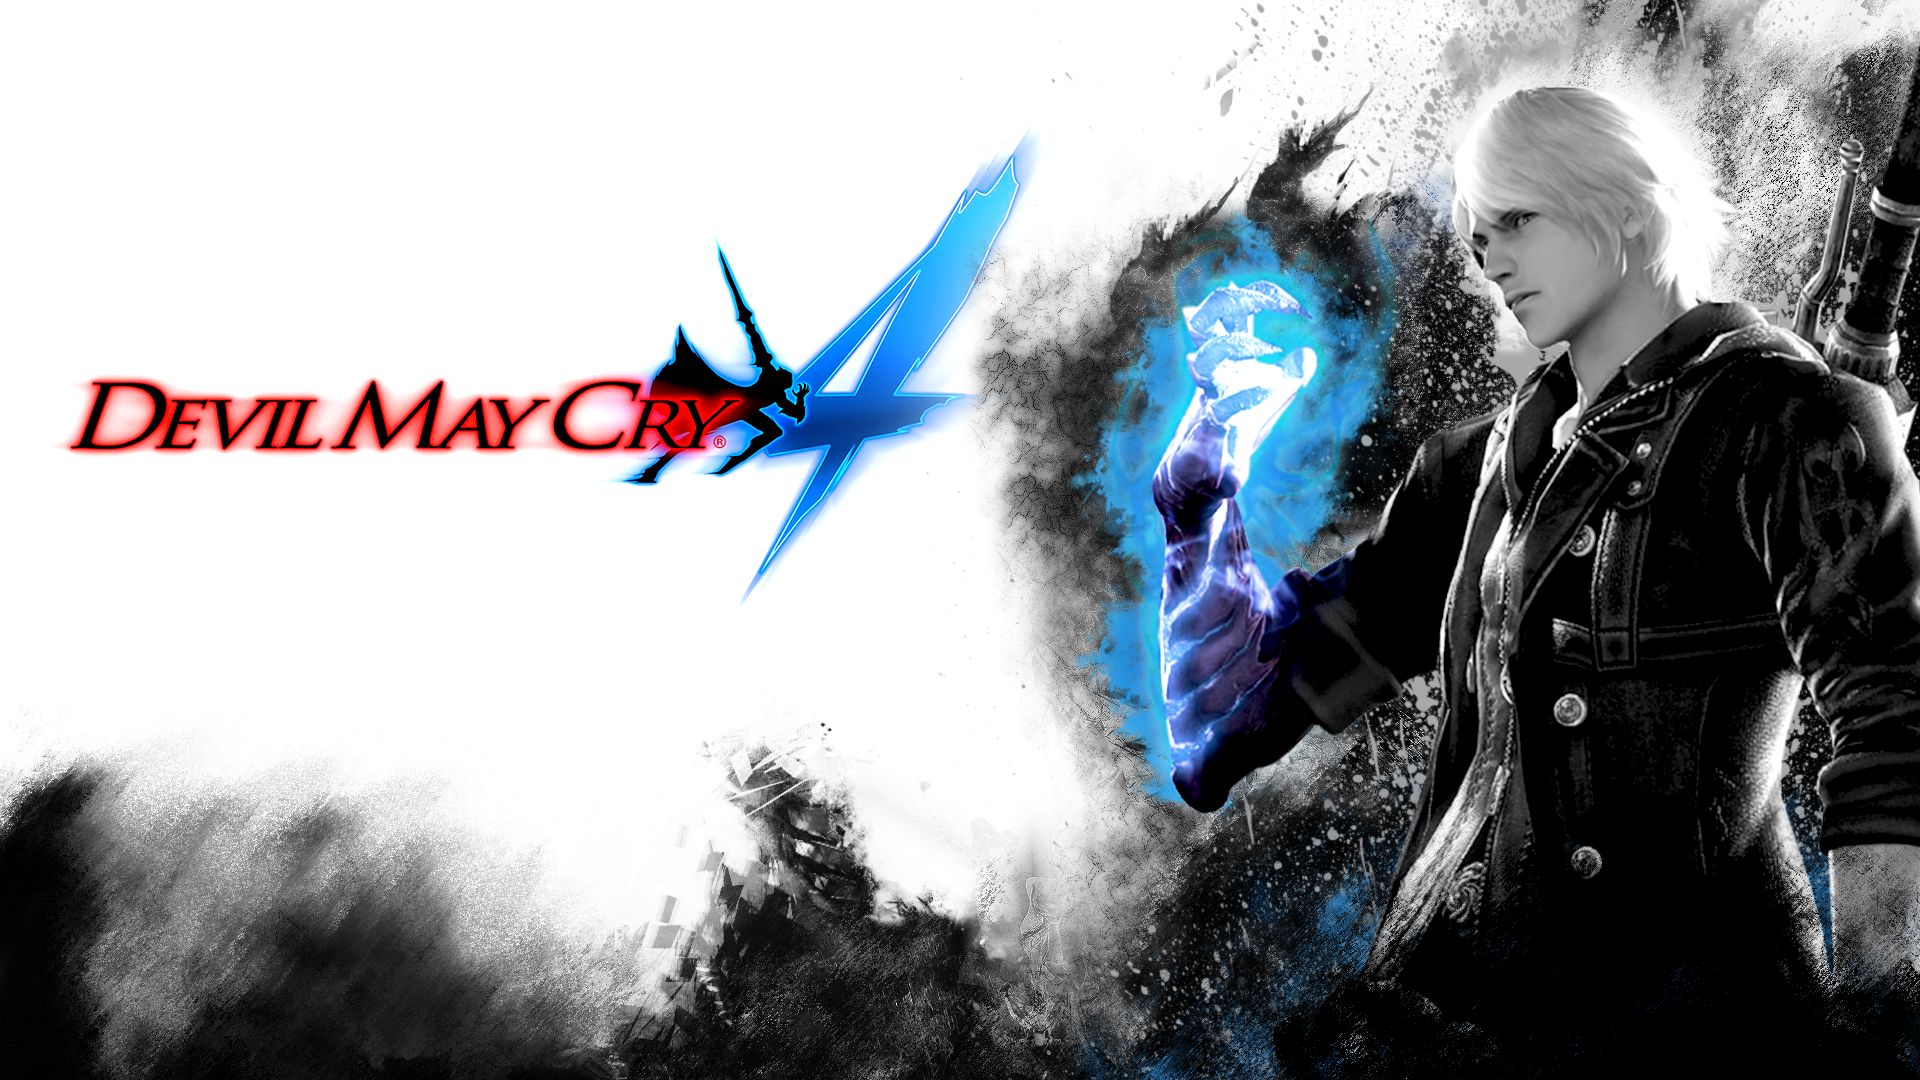 Devil may cry 4 on steam фото 70